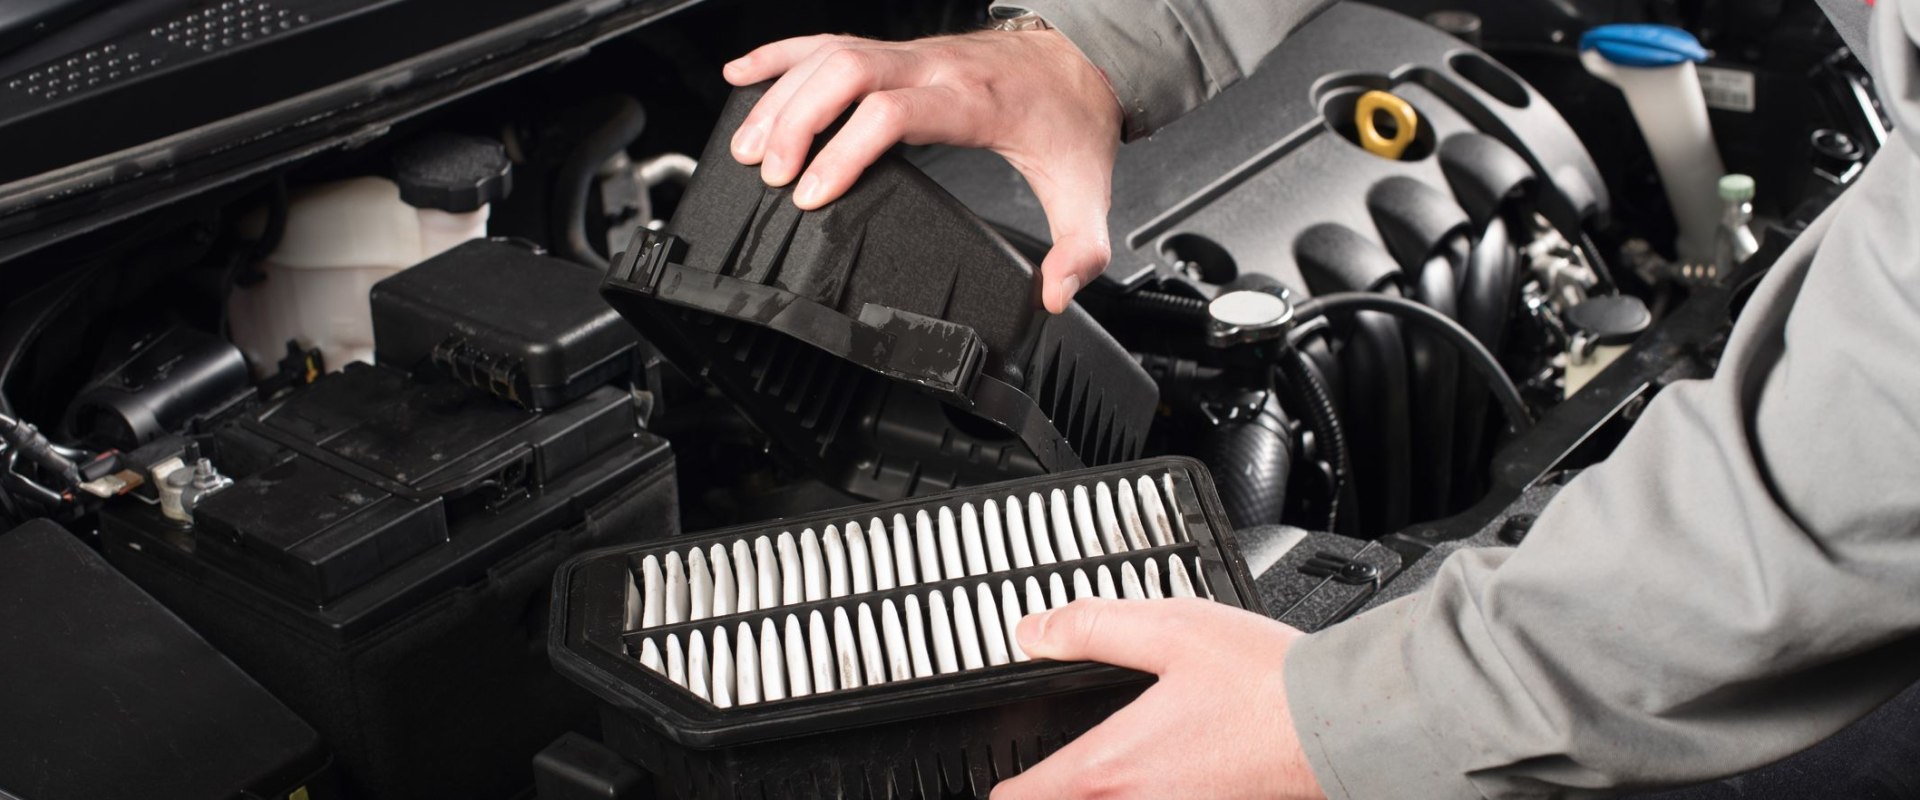 Are Cabin Air Filters All the Same Size?